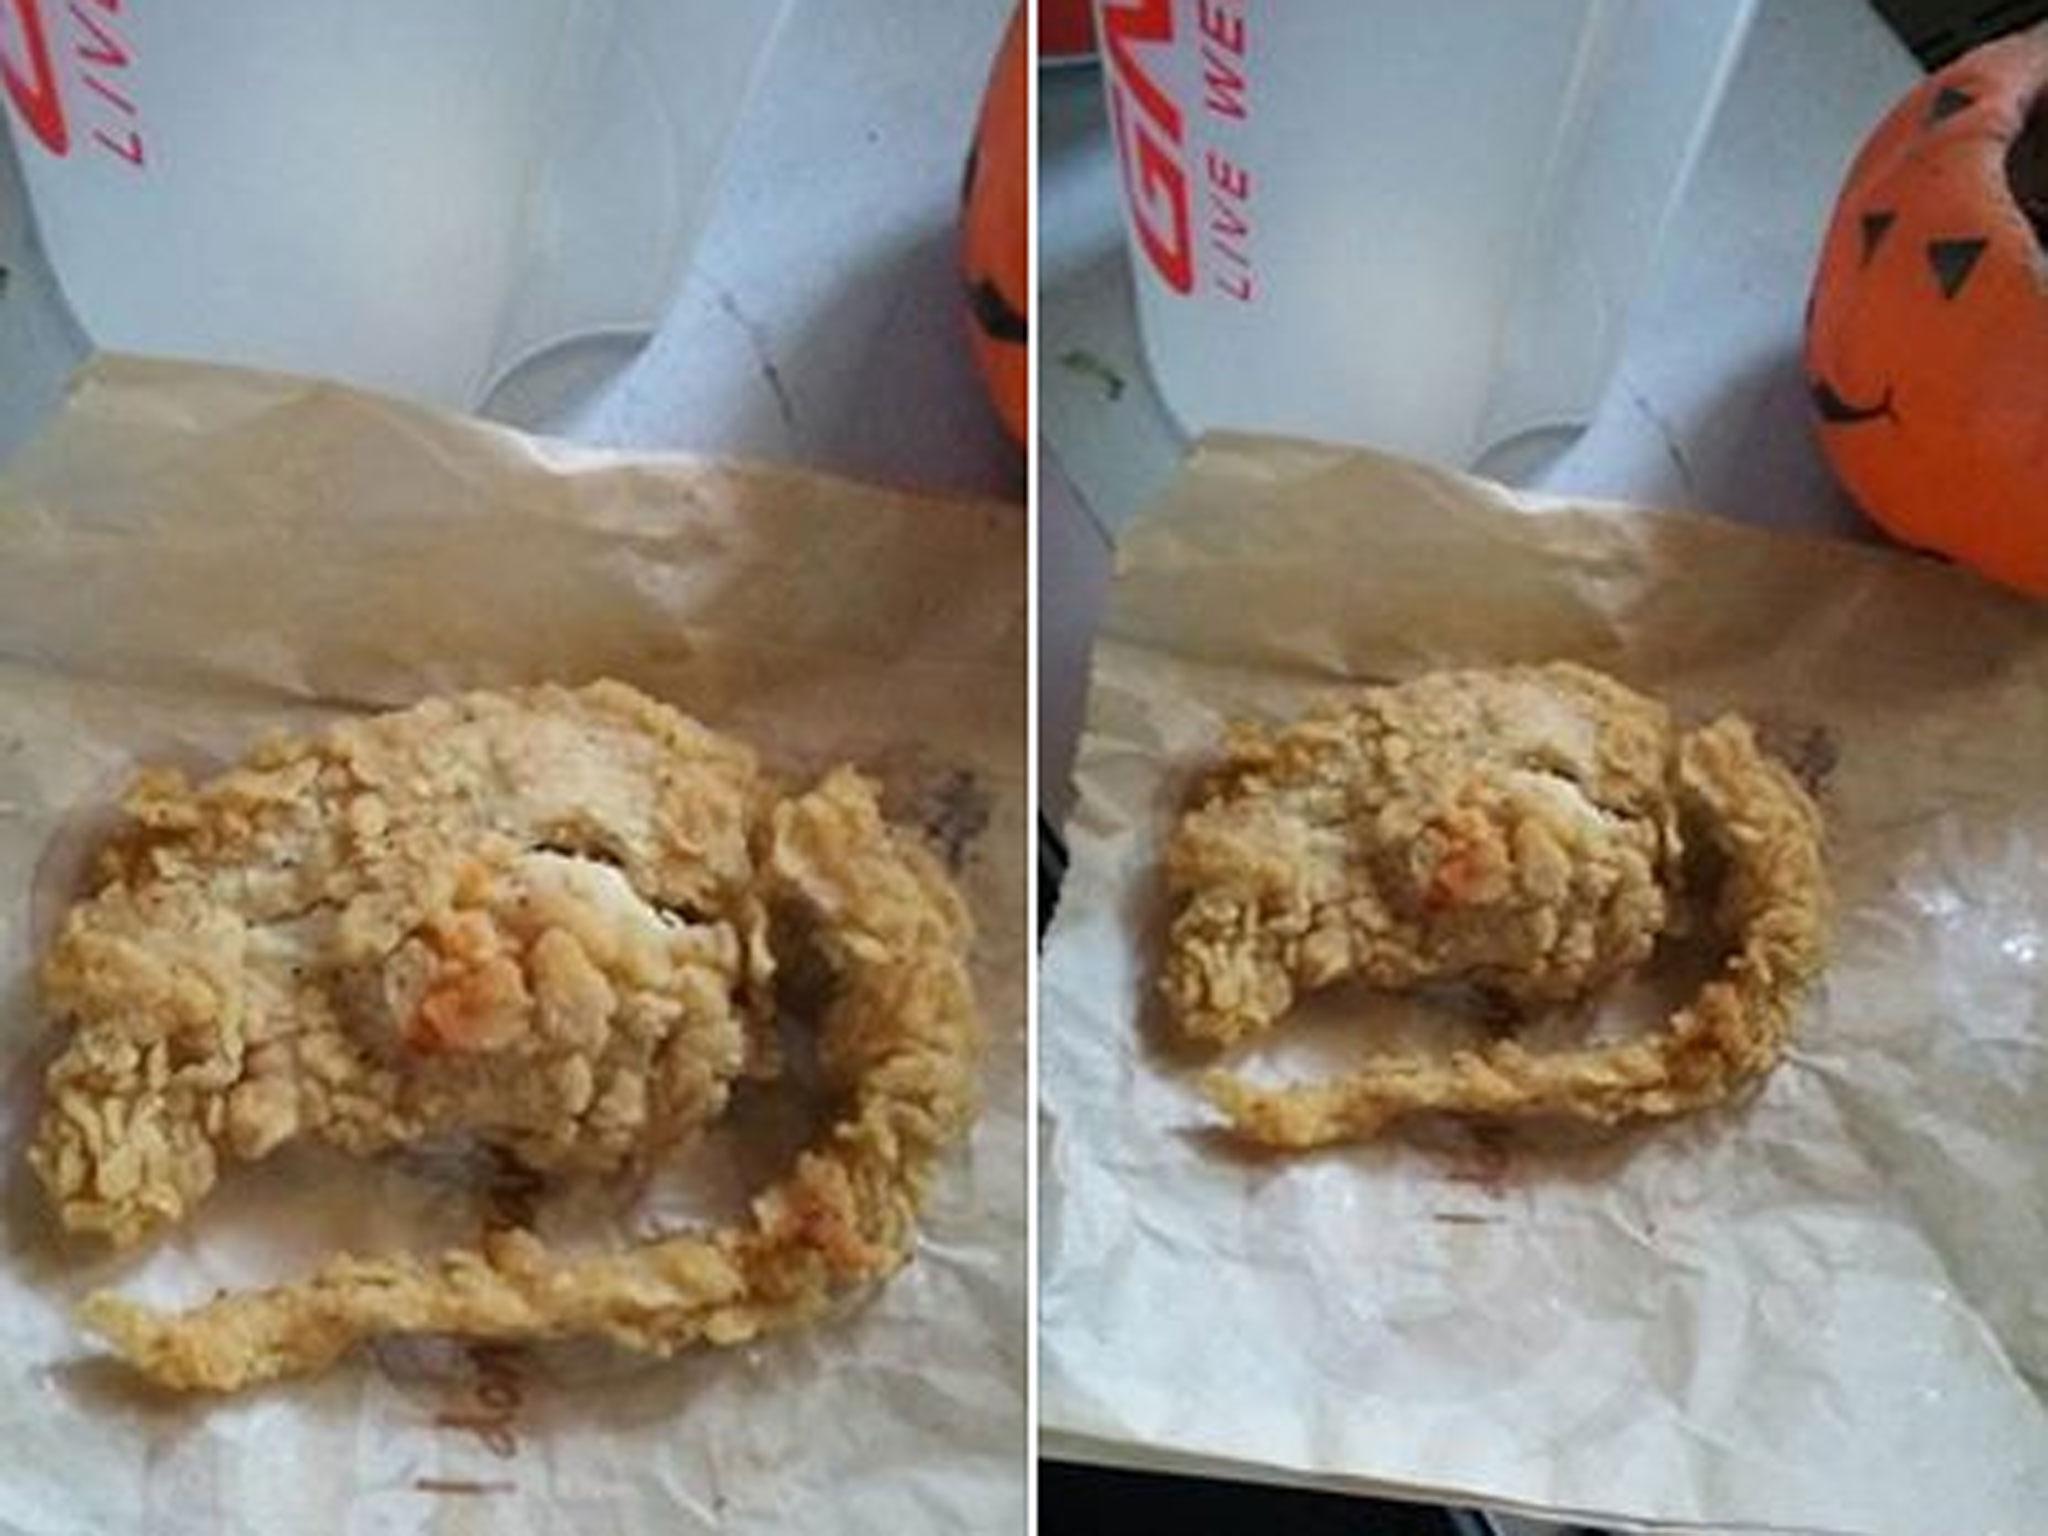 A man claims to have found a fried rat in his KFC meal